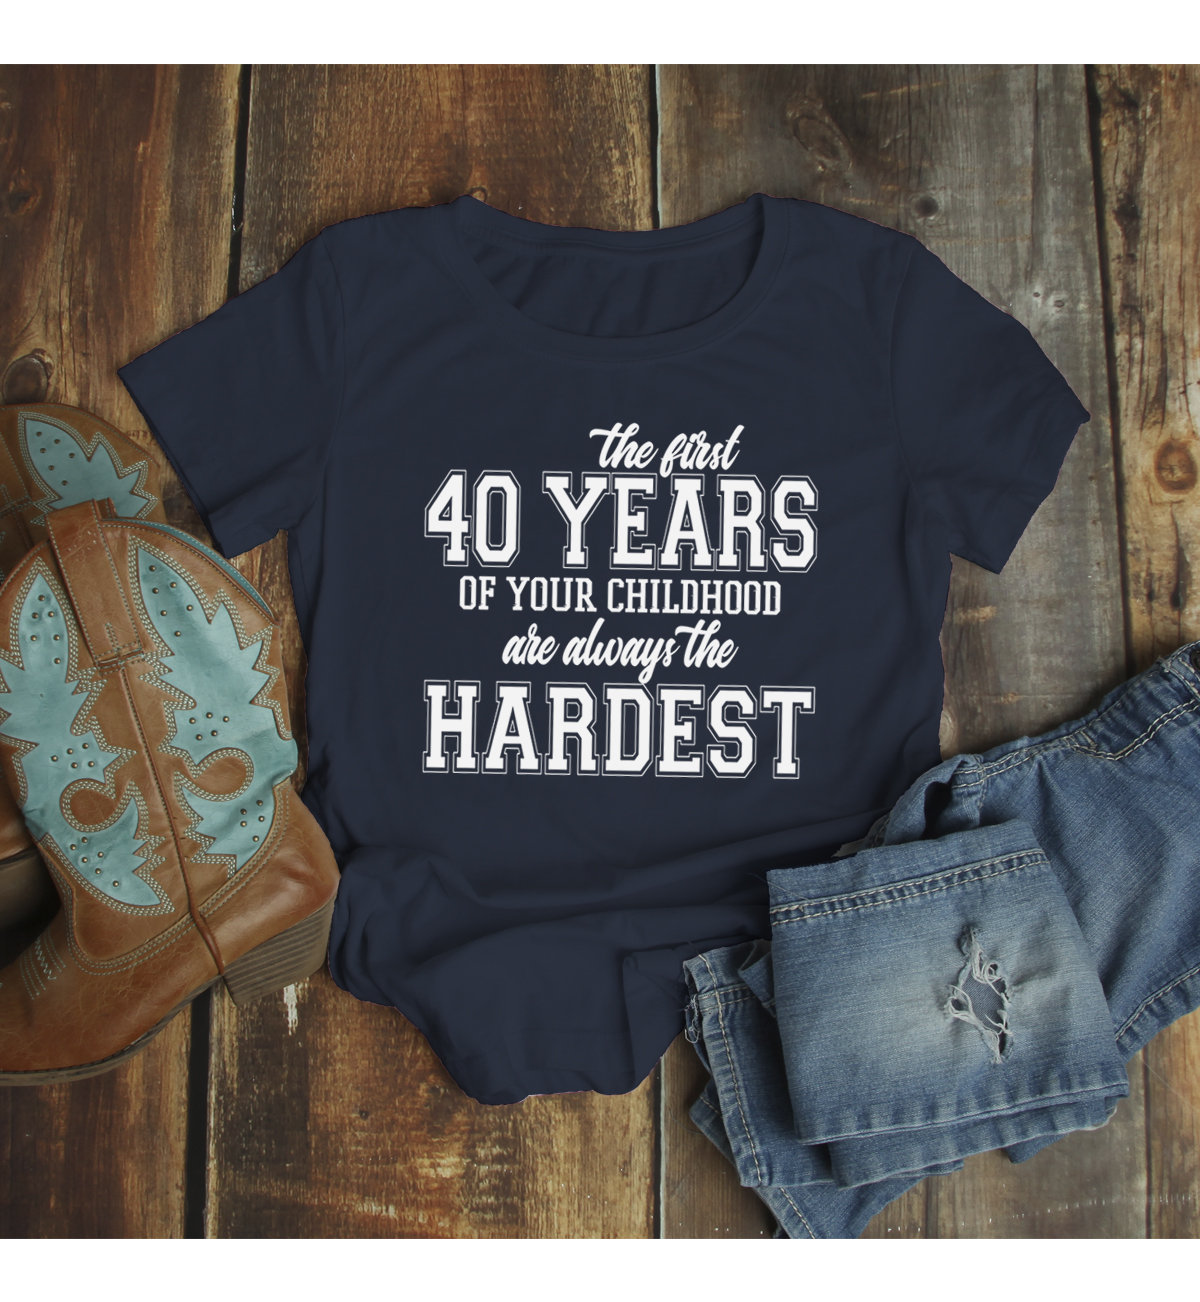 It Took Me 40 Years To Look This Good Ladies T Shirt 40th Birthday Present Funny 